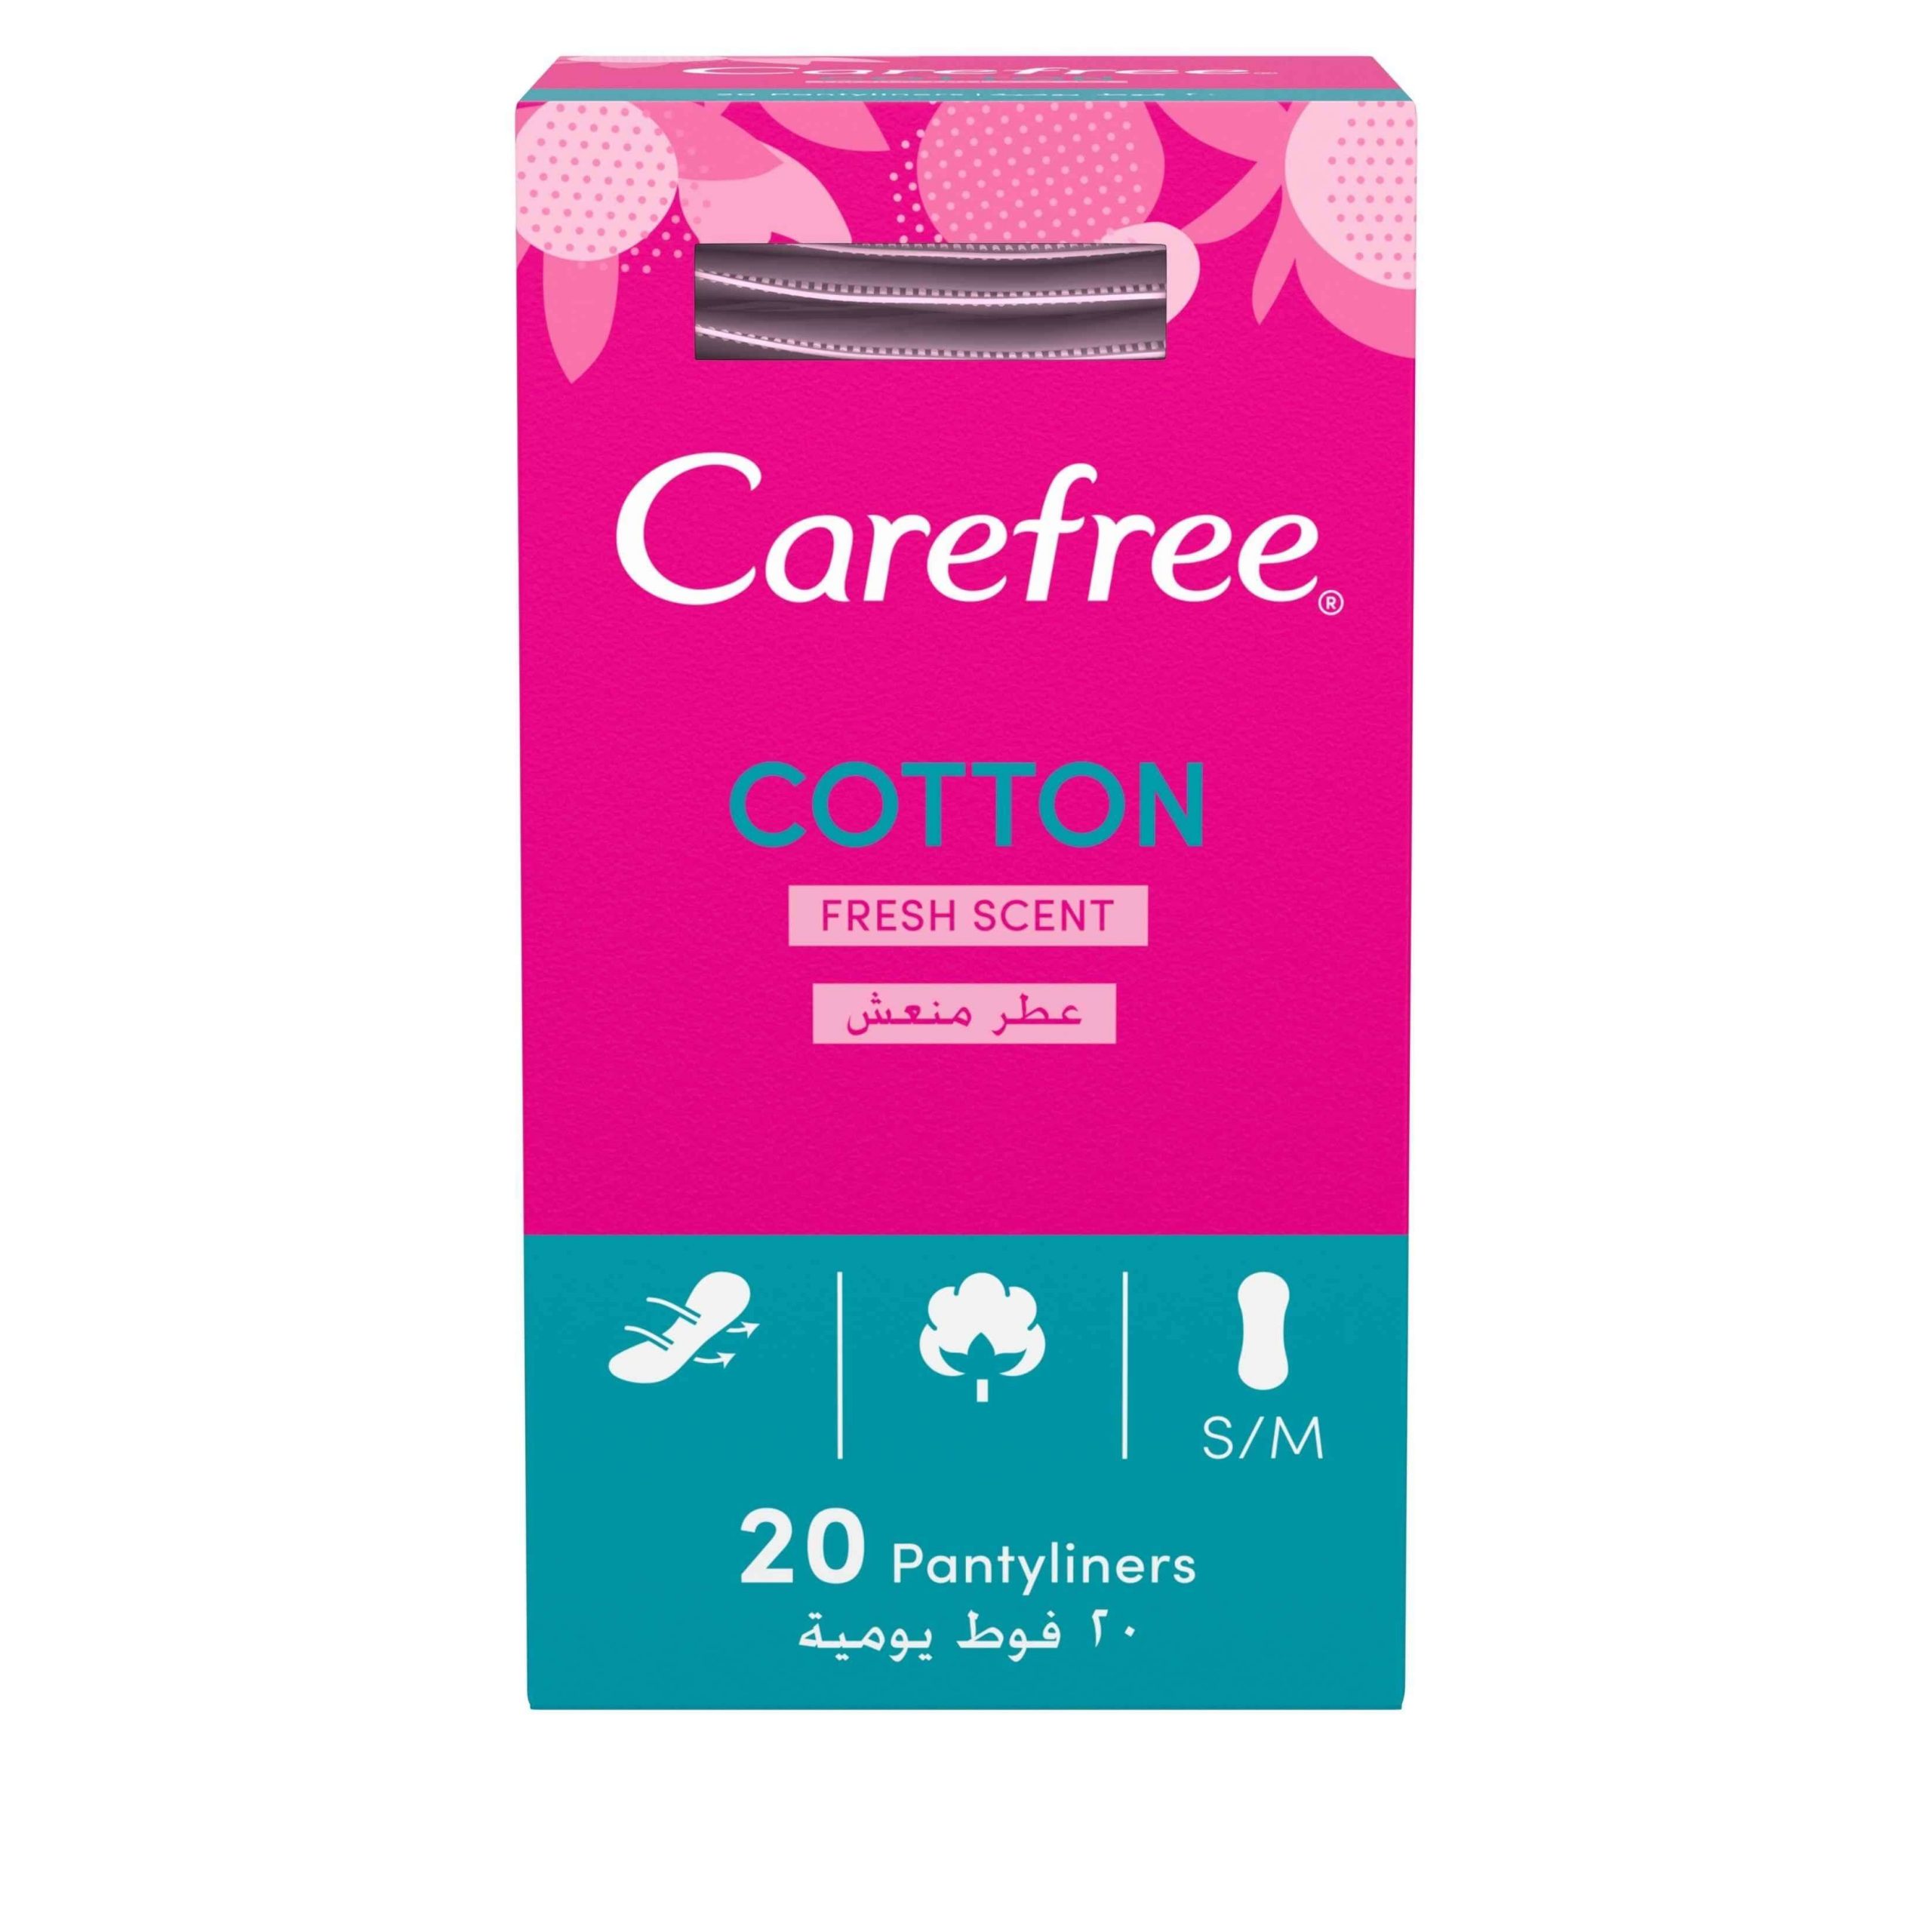 1589813280carefree-cotton-pantyliners-with-fresh-scent-20-pantyliners.jpg